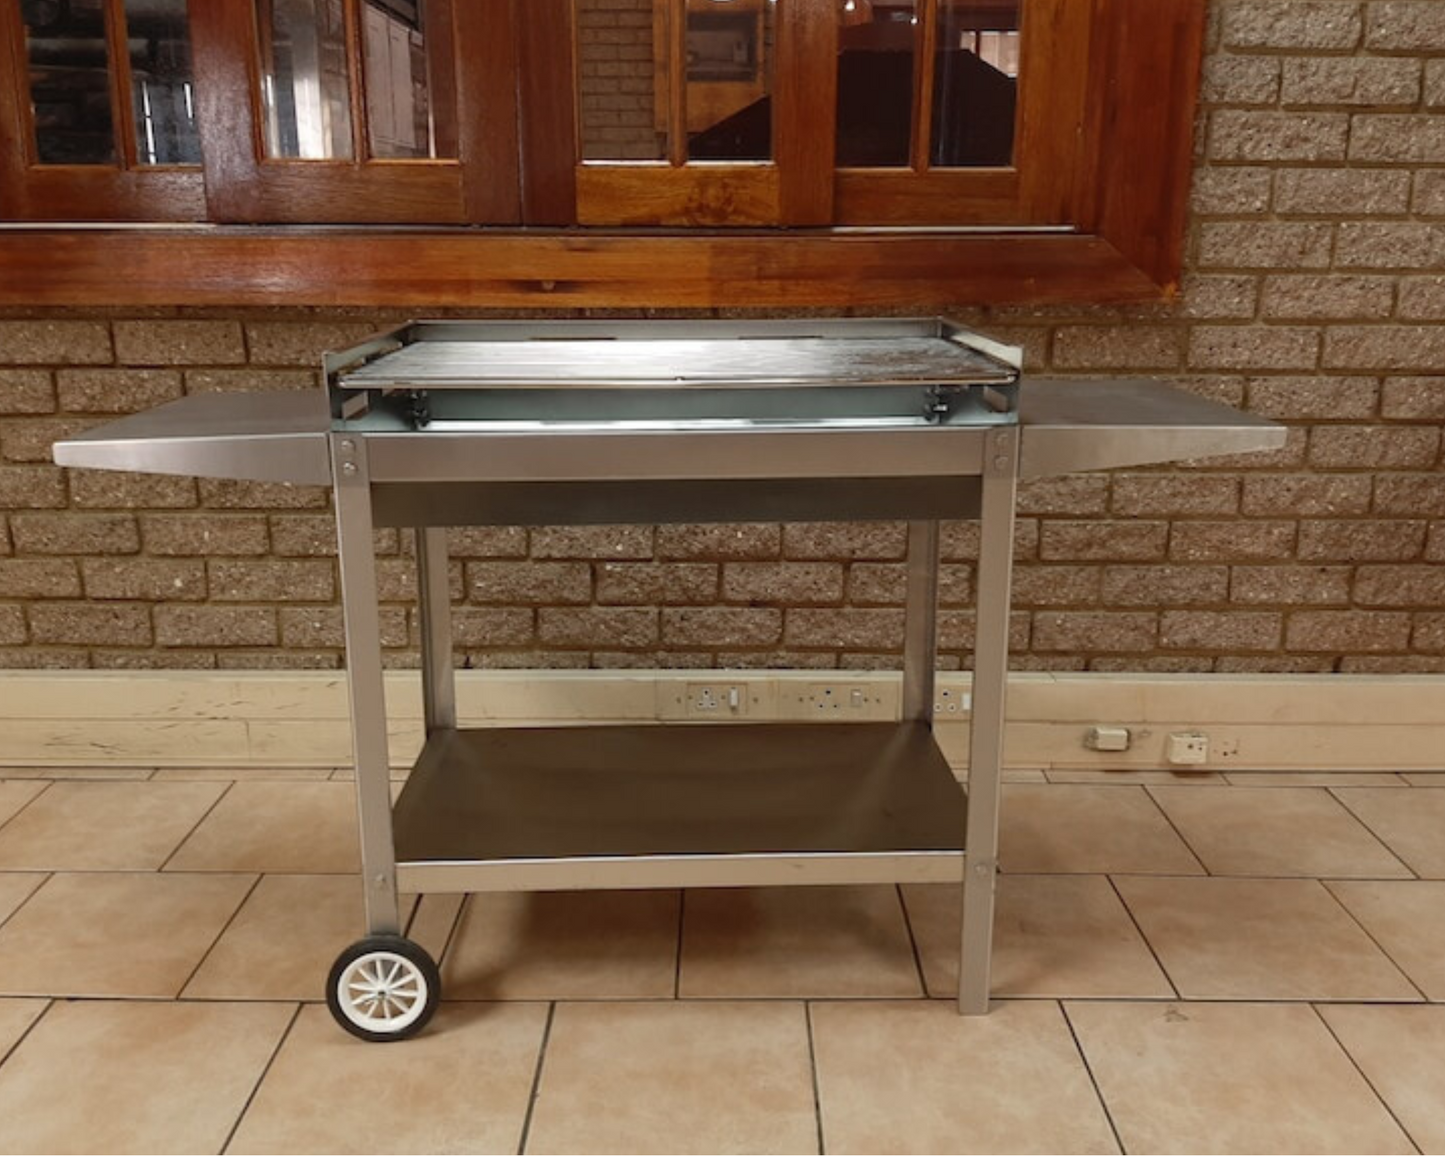 Jetmaster 760 SS Patio grill